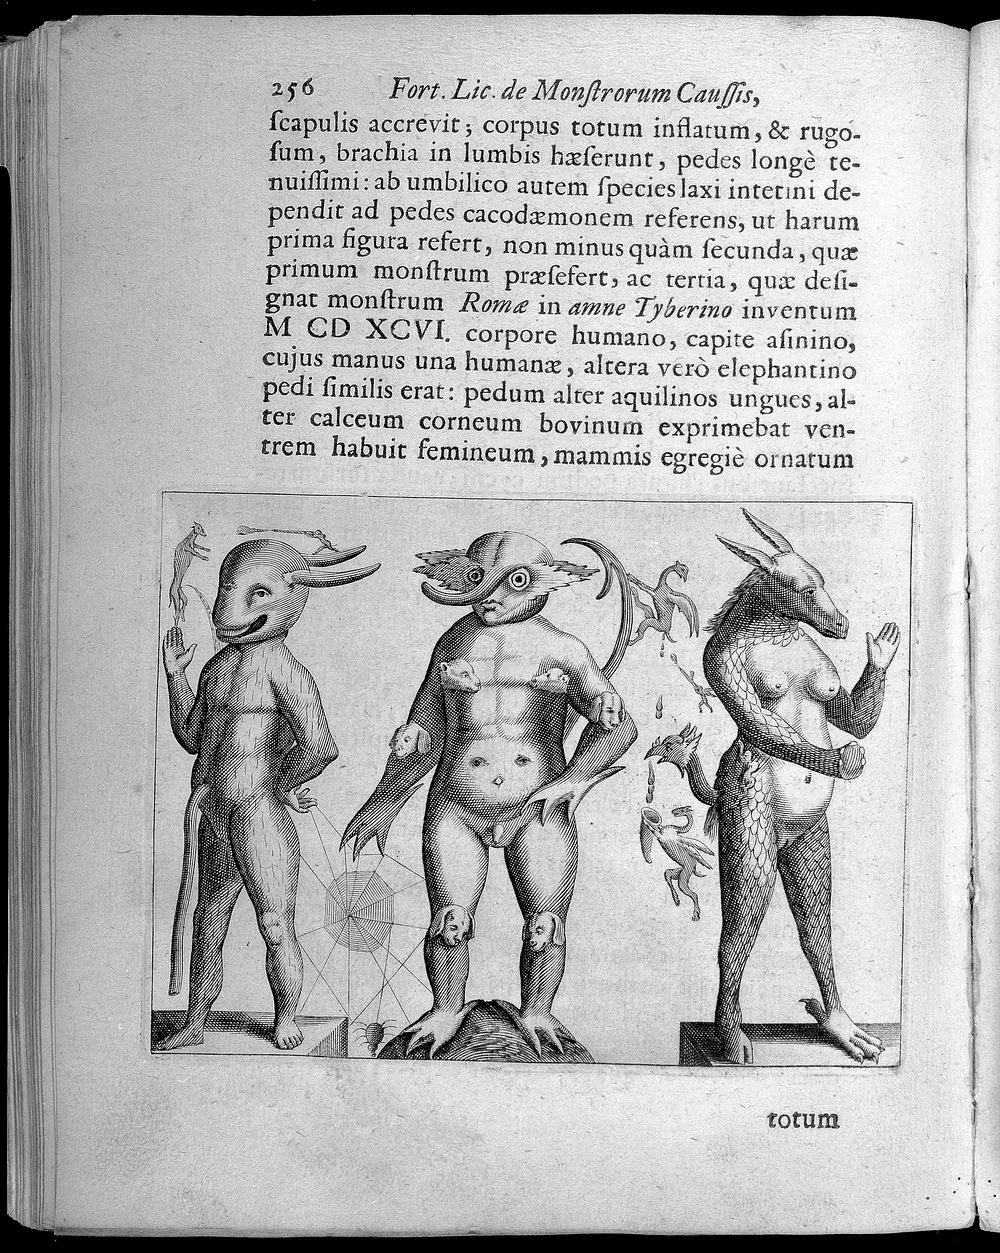 Three figures with abnormalities